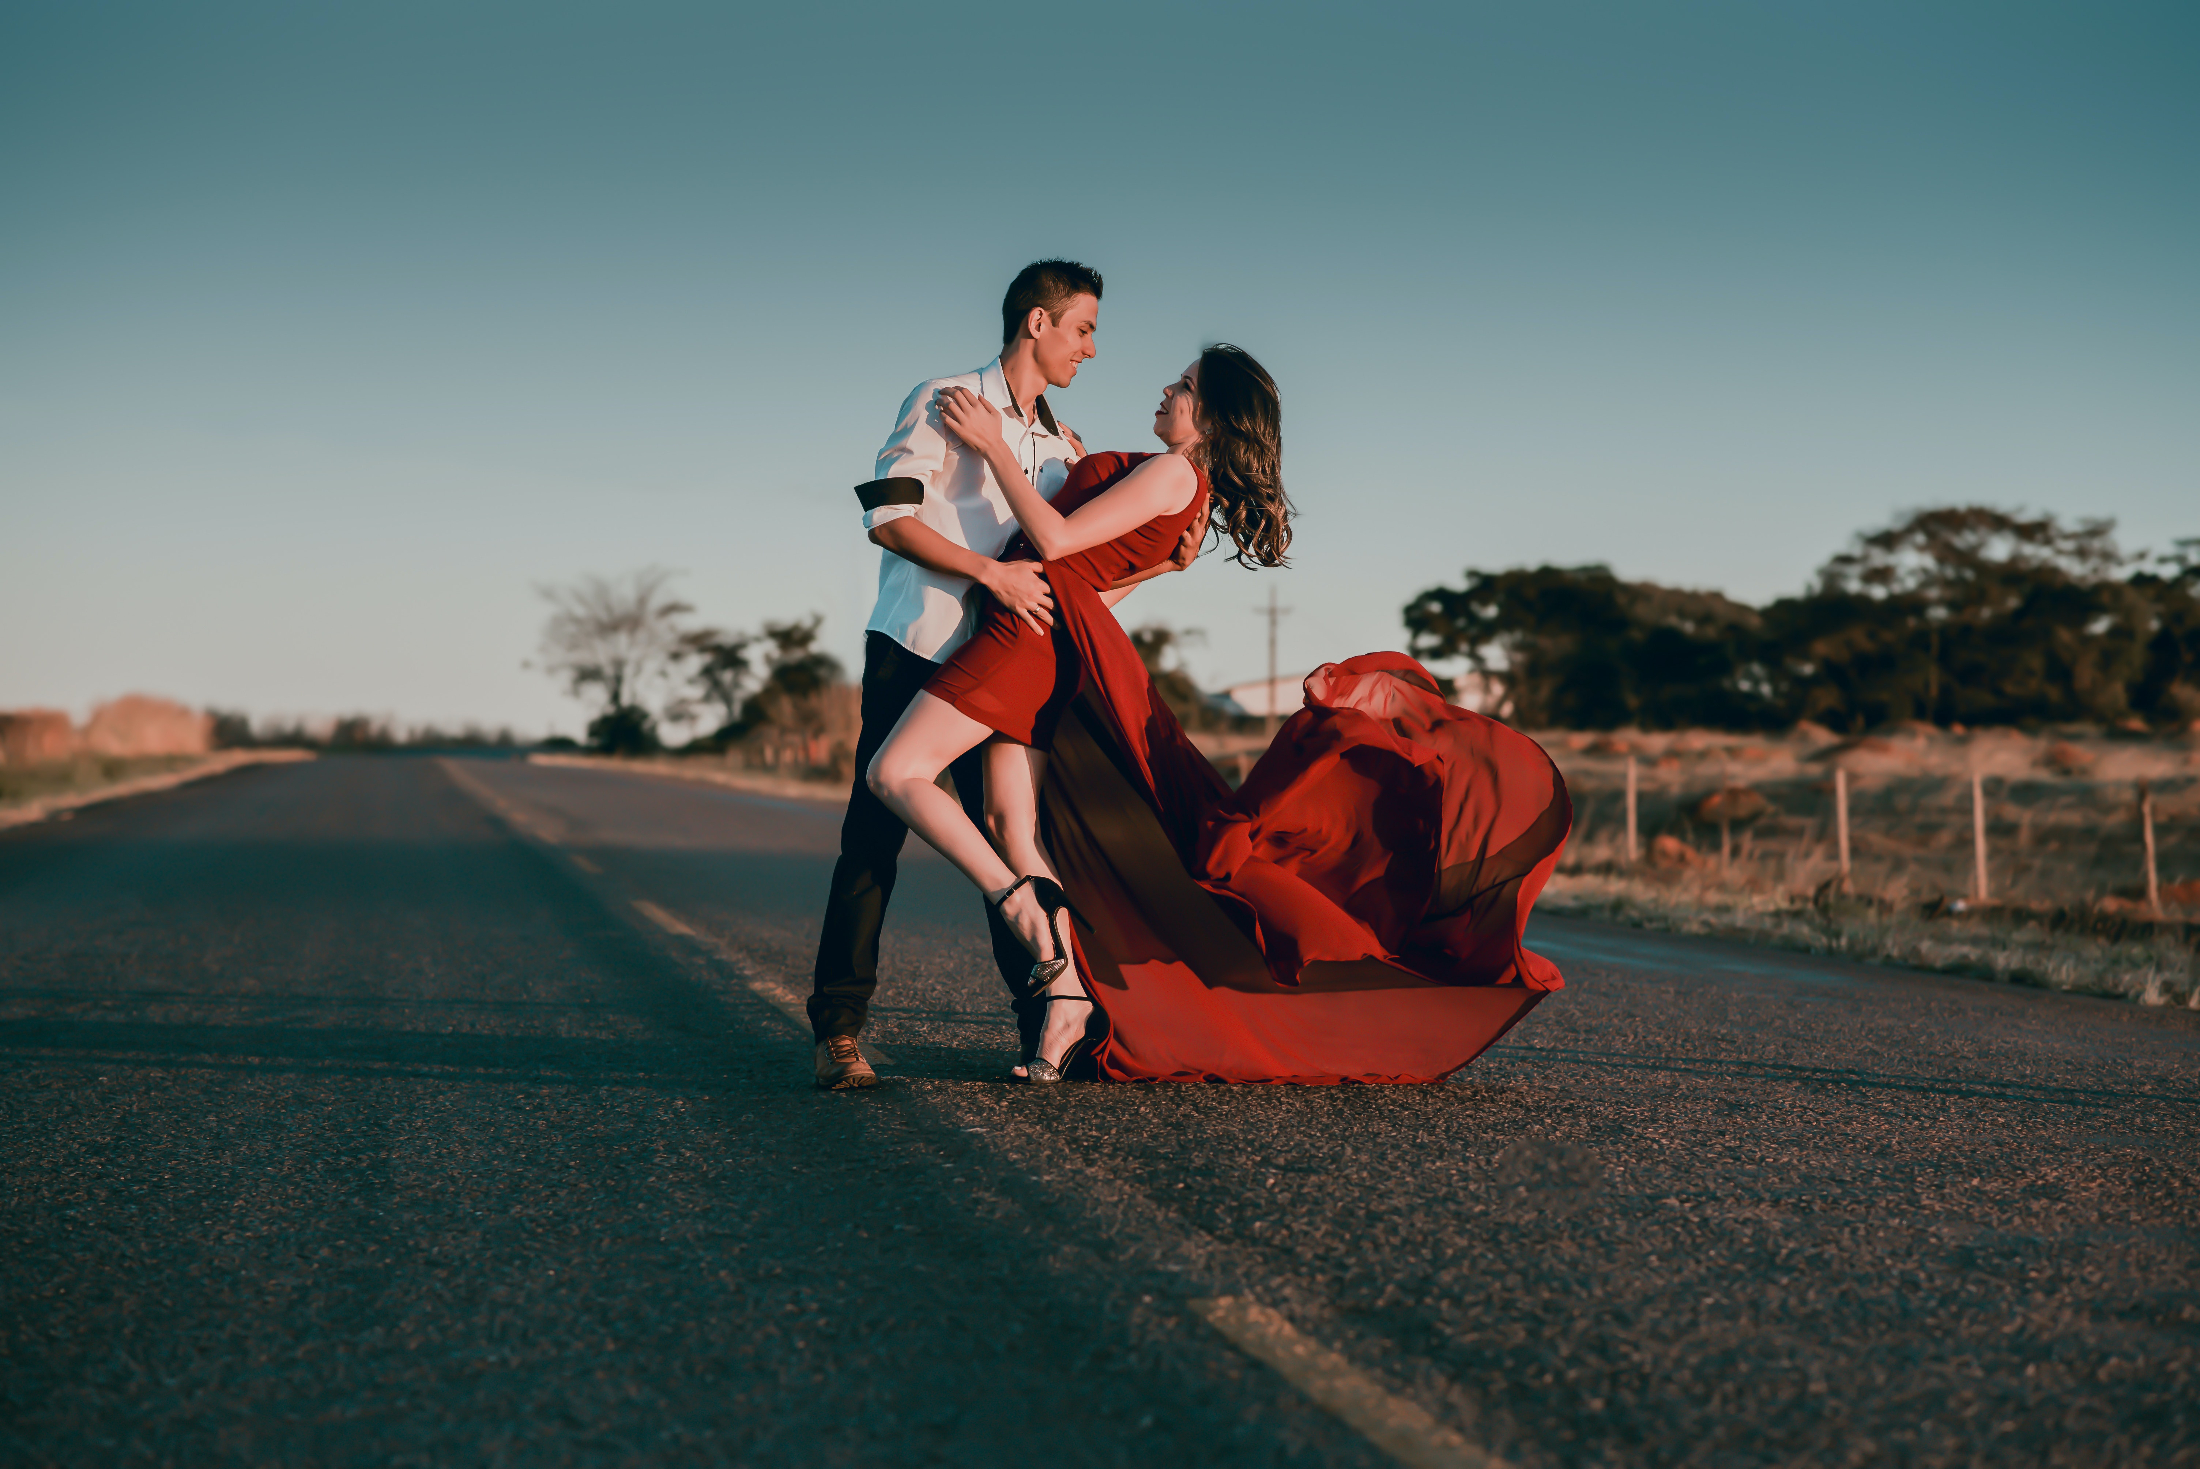 A couple dancing in the road. | Source: Pexels